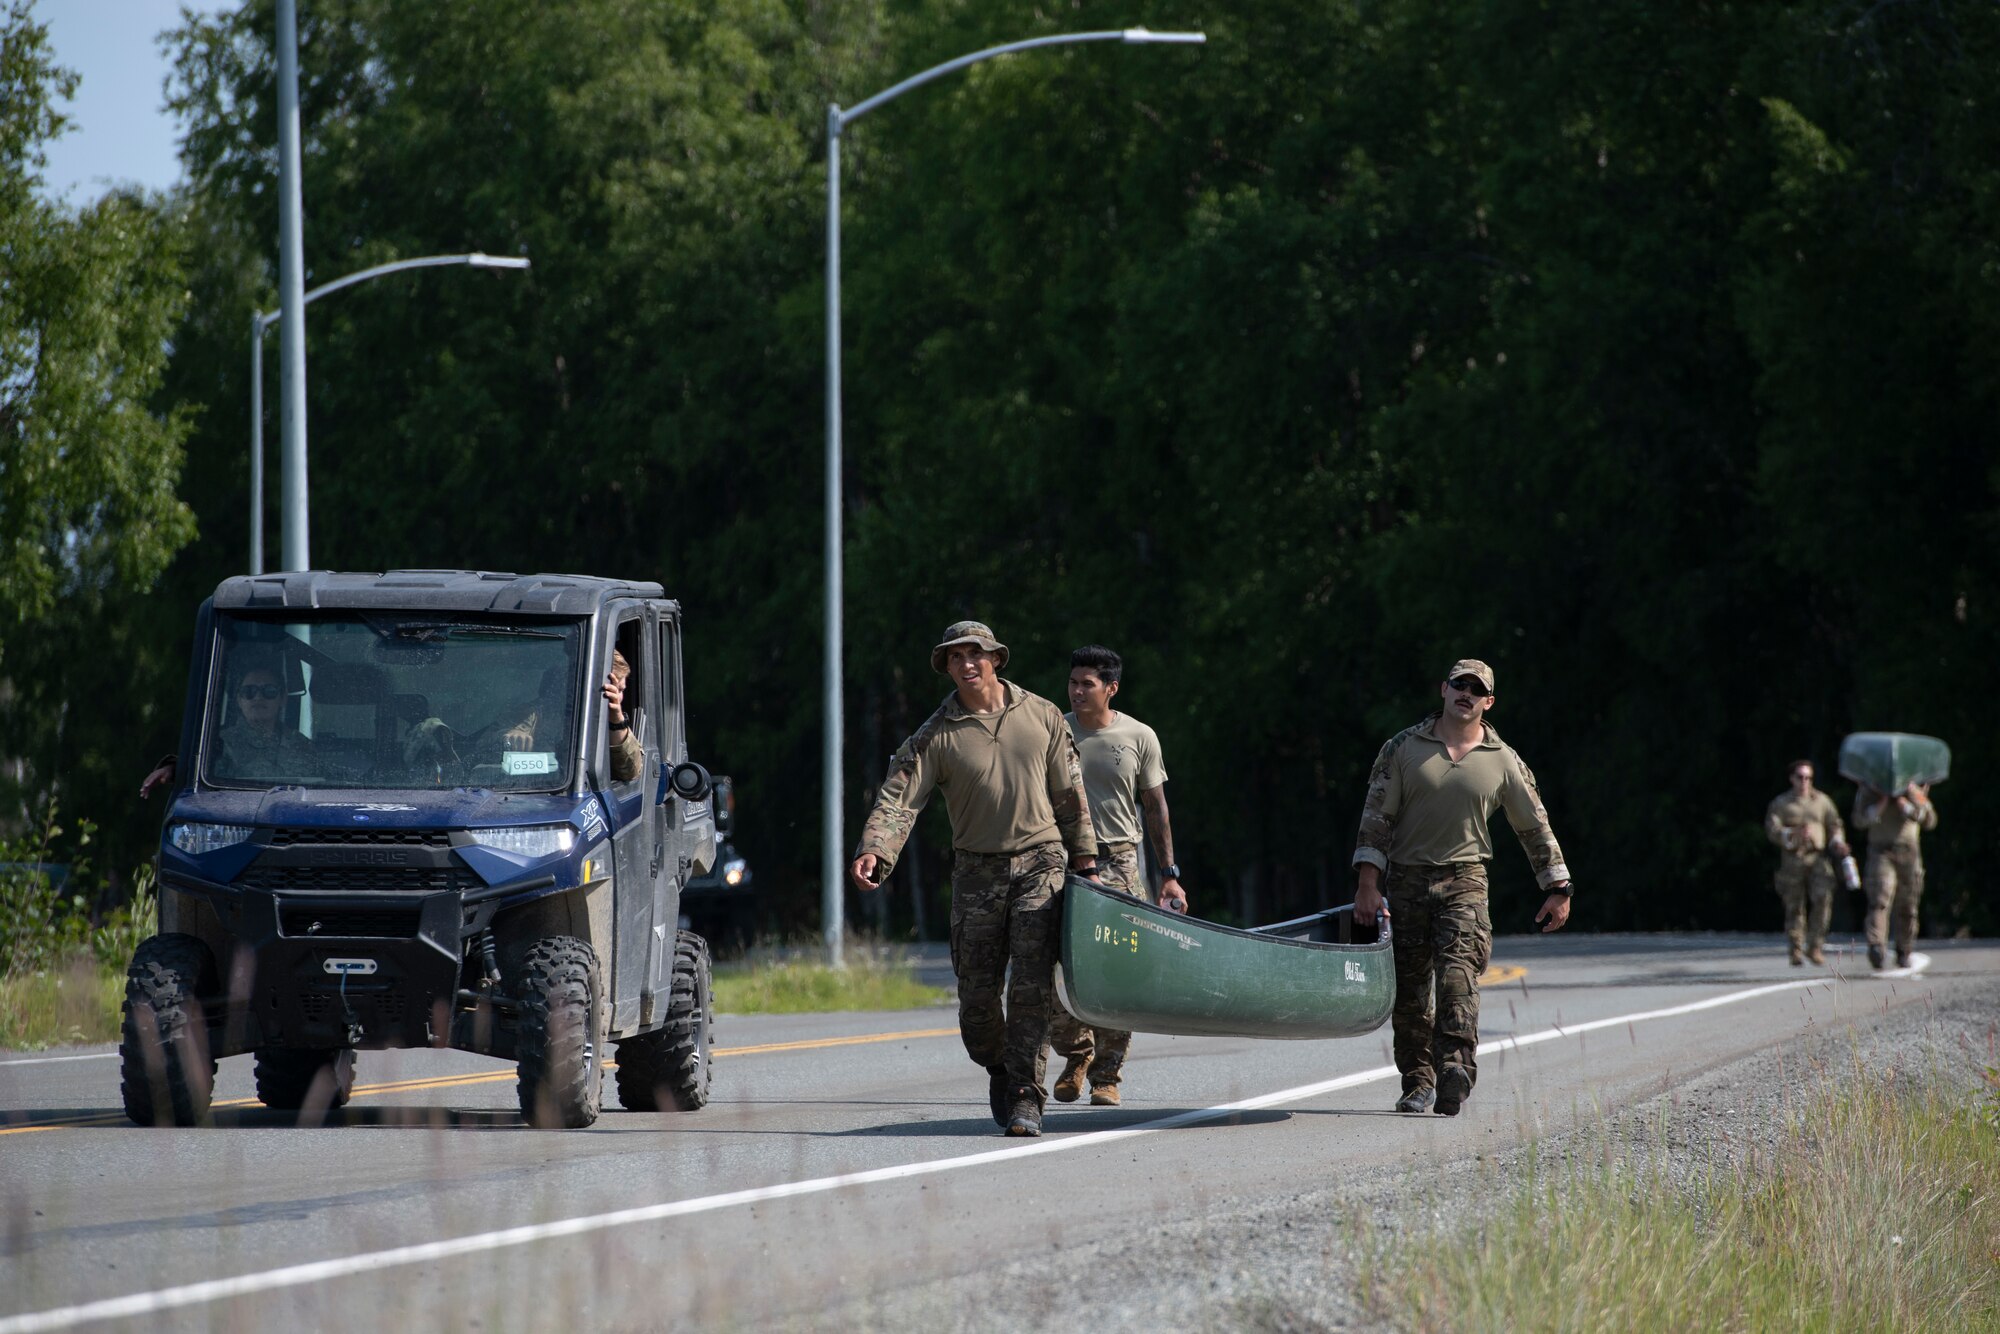 U.S. Air Force tactical air control party (TACP) specialists from the 1st Air Support Operations Group, carry their canoes while competing in the Chaos Challenge 2021 at Joint Base Elmendorf-Richardson, Alaska, July 15, 2021. The Chaos Challenge 2021 was a multi-day series of mental and physical contests sponsored by the 1st Air Support Operations Group with participants from the 3rd, 5th, 25th, and 604th Air Support Operations Squadrons and a guest team from the 673d Security Forces Squadron. The winner of the competition will go on to compete in Lightning Challenge 2021 to determine the best two-man TACP team in the Air Force.